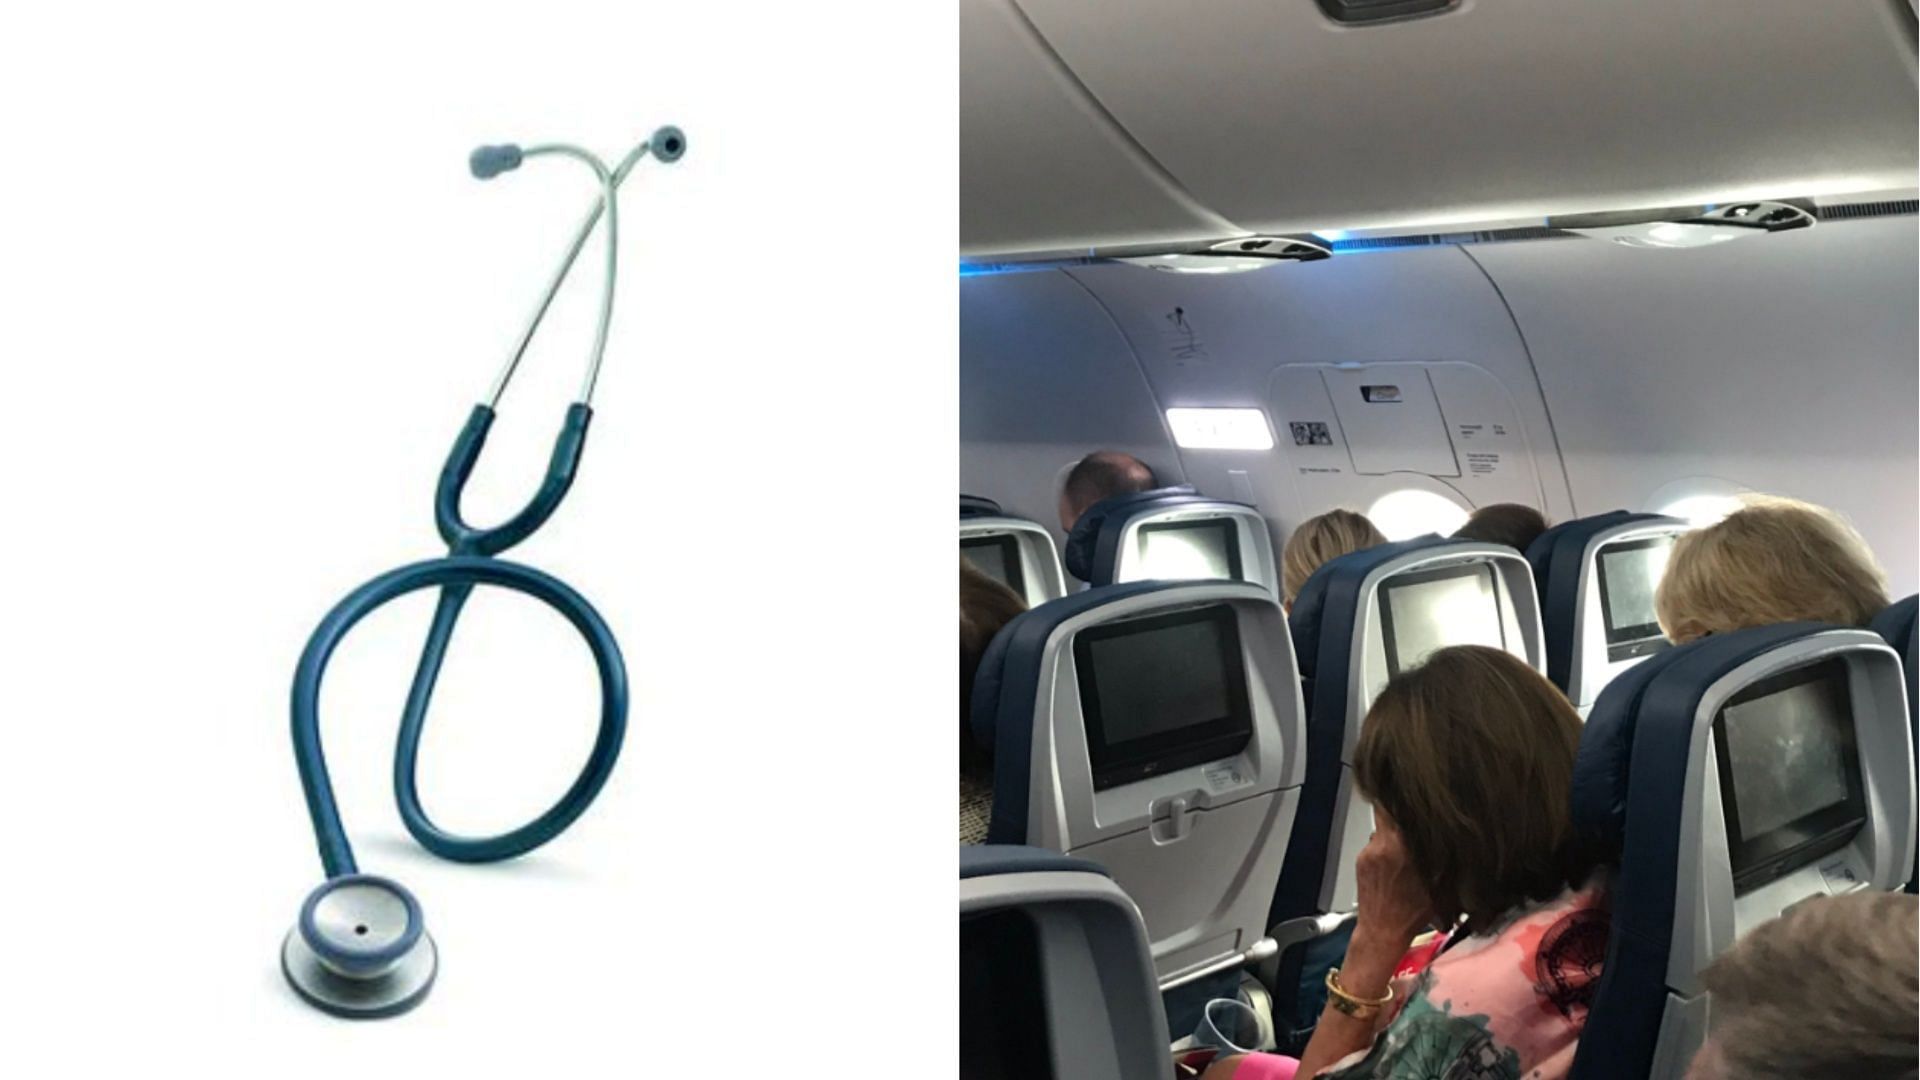 A doctor during a long-haul international flight declined to help during a midair emergency as he was under the influence of alcohol. (Image via X/crosshairdeals/jeffzeleny)